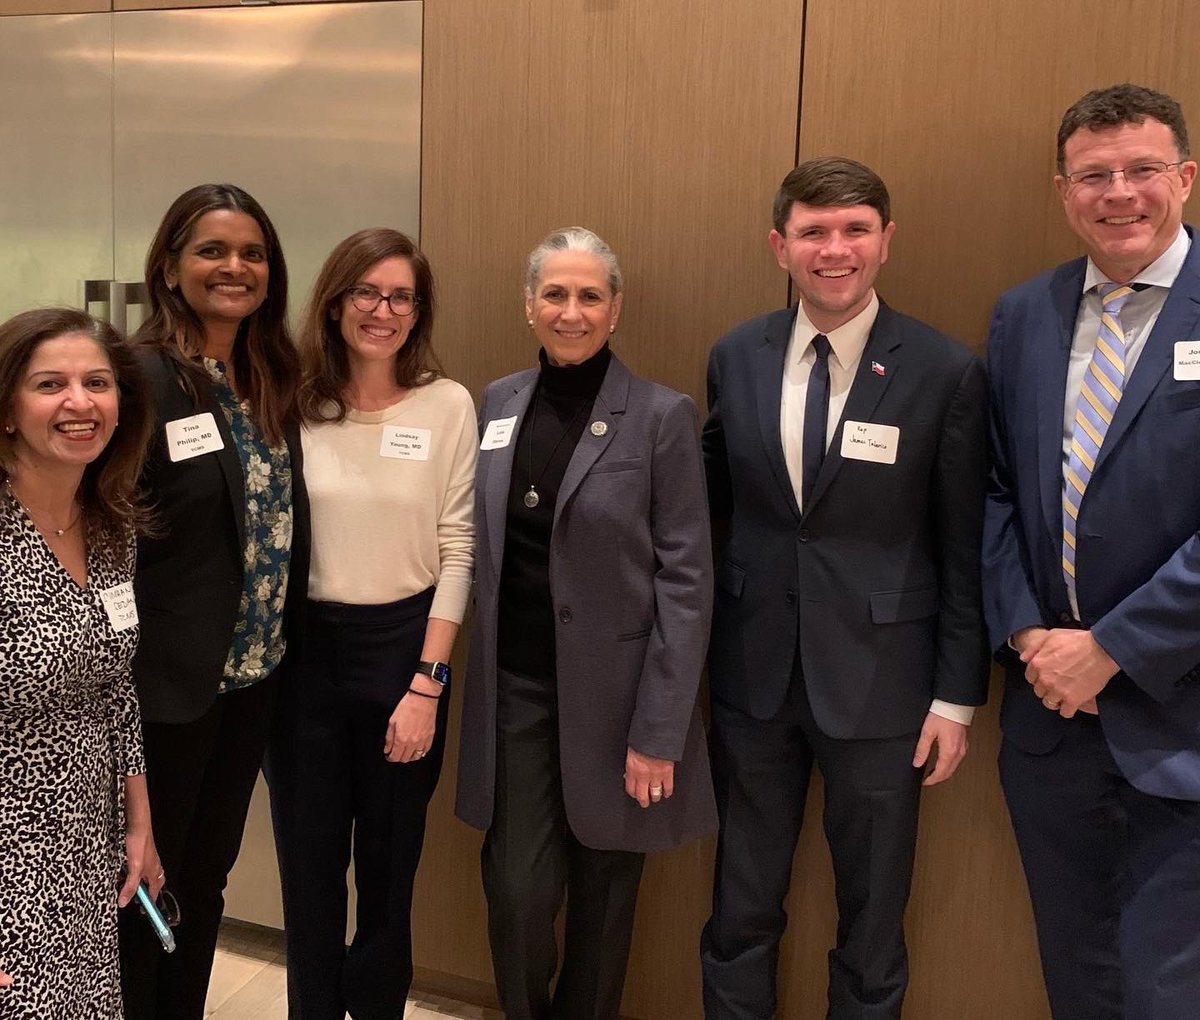 Lovely evening with fellow @traviscountymedical colleagues discussing issues affecting patients and physicians in Texas with some of our state reps. Hope to speak more at #FirstTuesdays. #txlege #womeninmedicine #presidentelect  #independentpractice #familymedicine